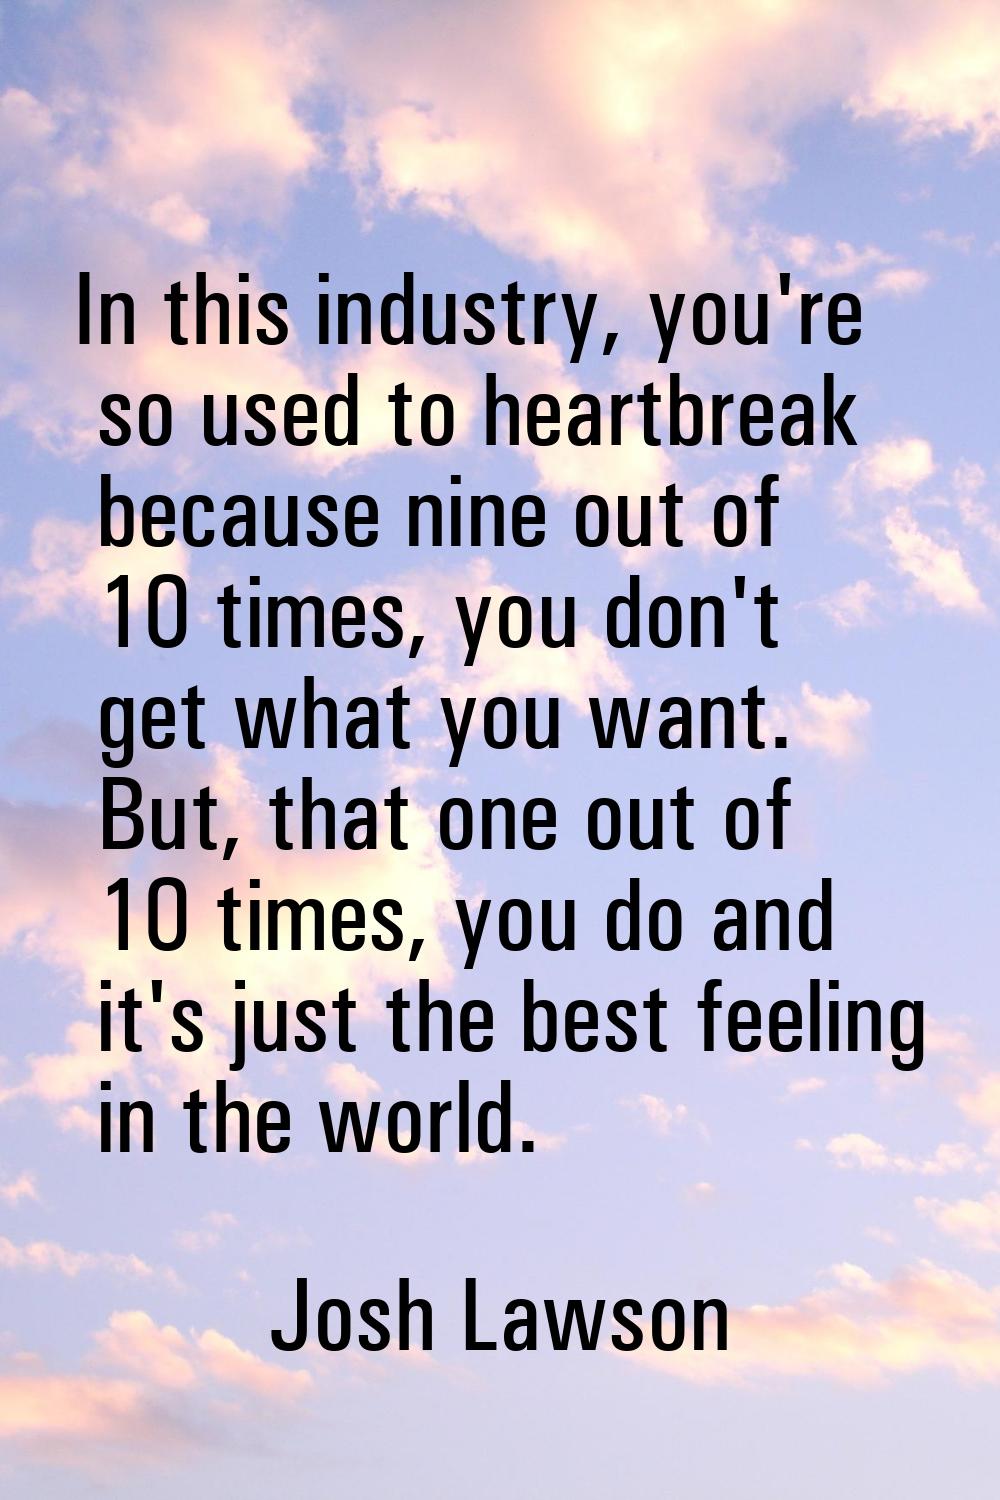 In this industry, you're so used to heartbreak because nine out of 10 times, you don't get what you